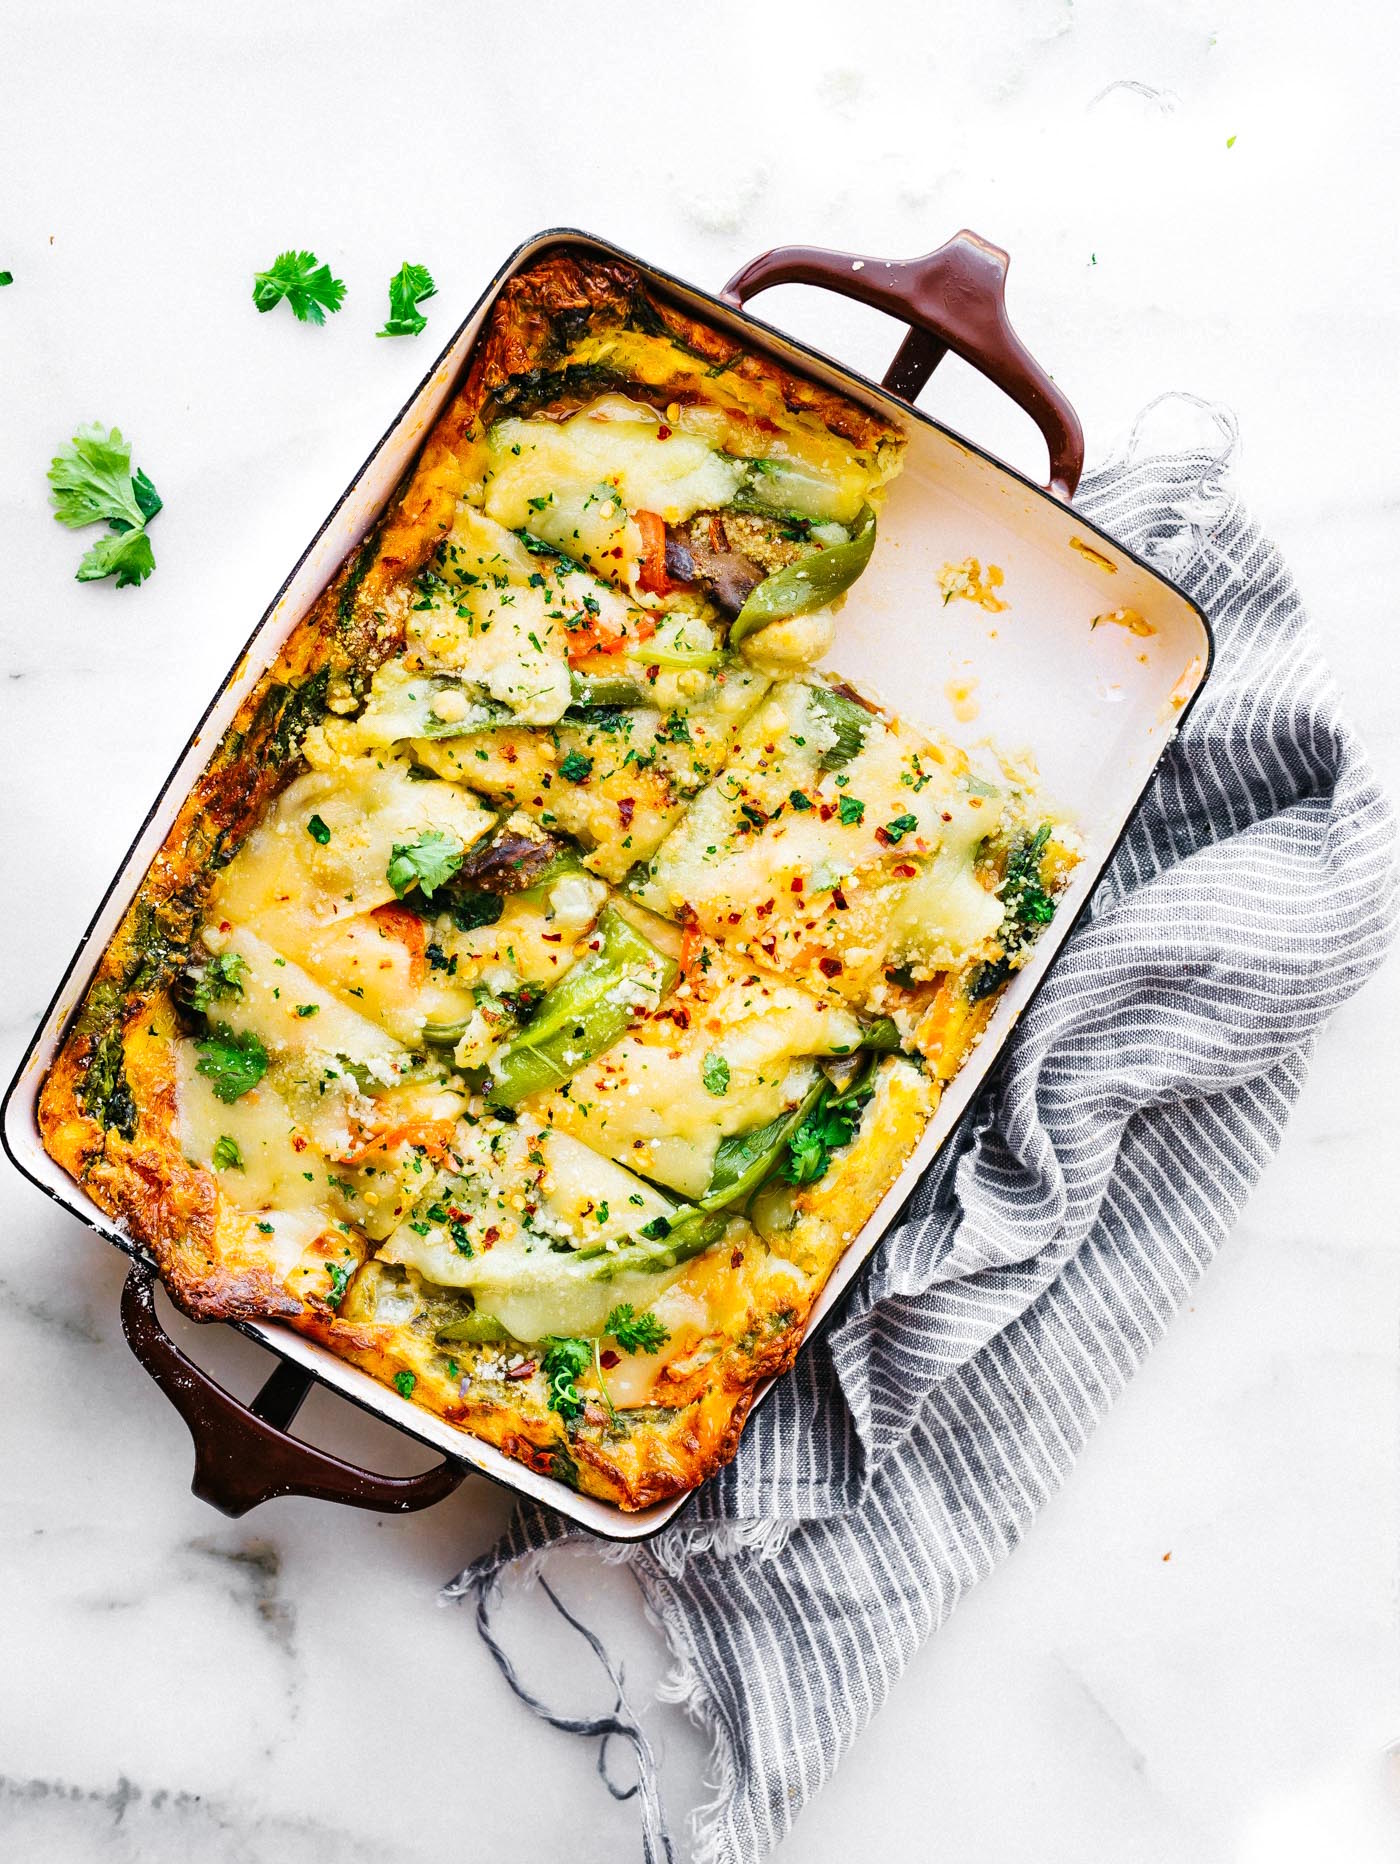 Roasted Hatch Green Chile Egg Casserole in a casserole dish